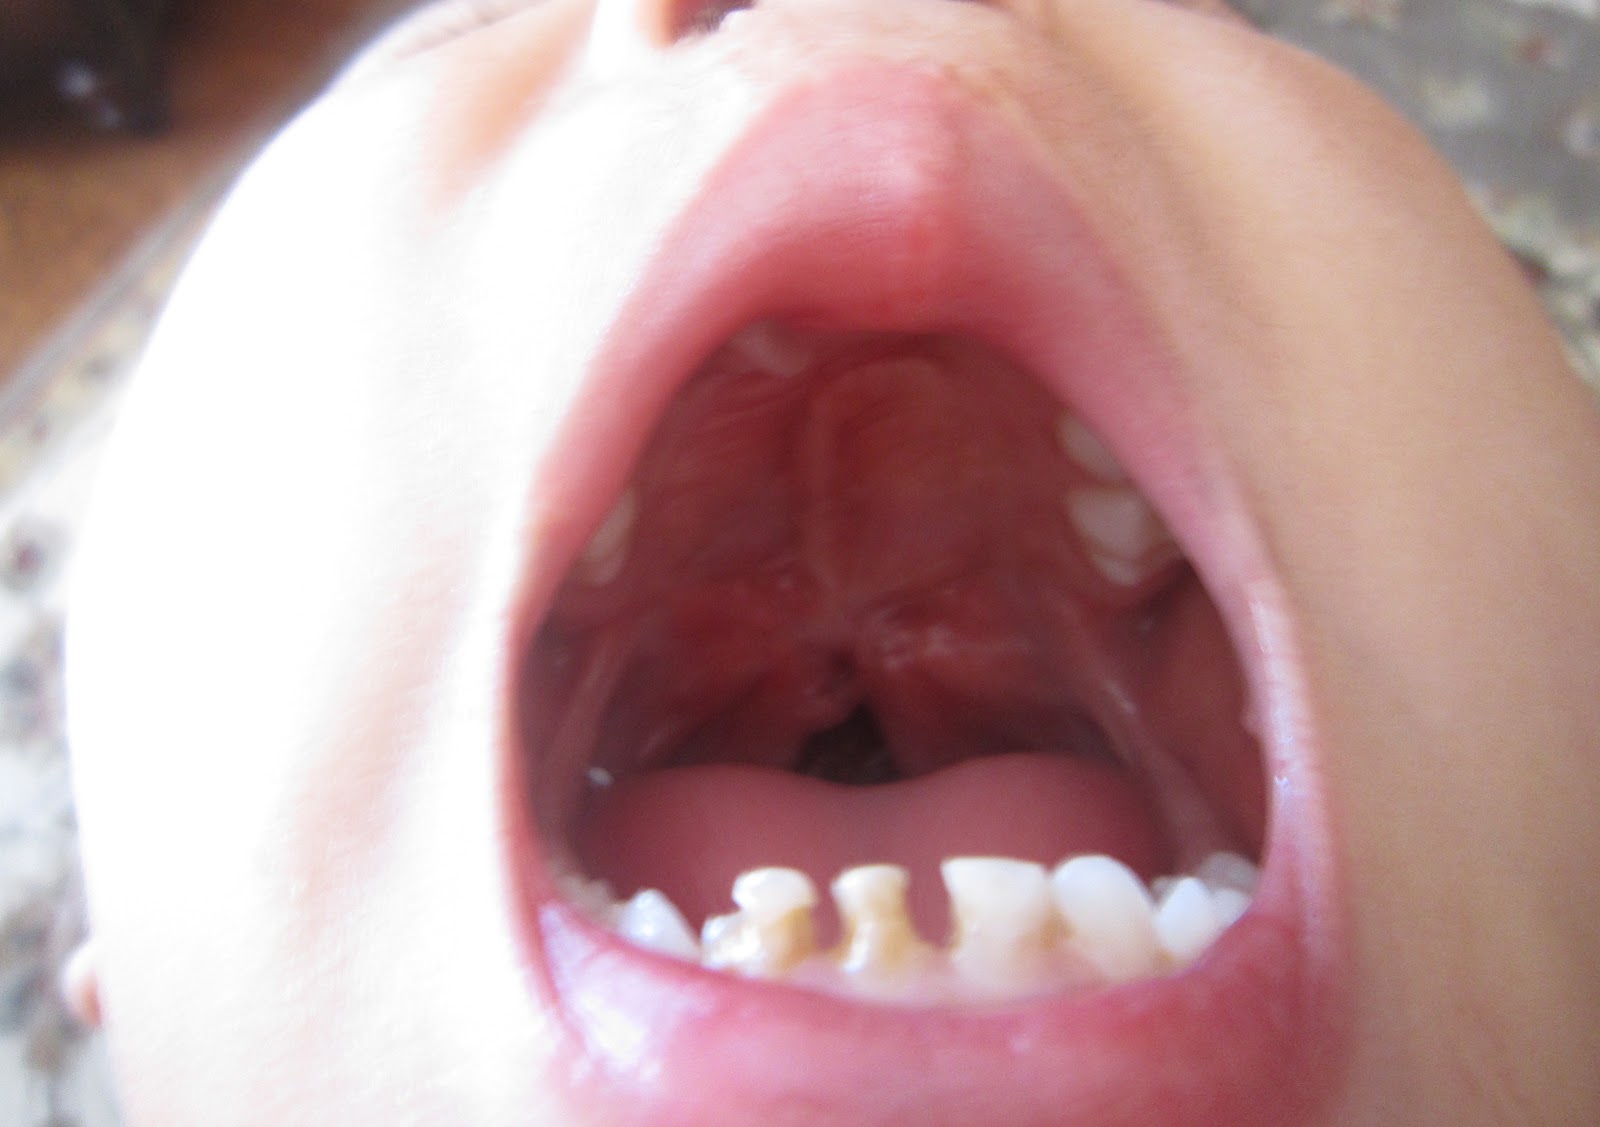 Patterns Of Soft Palate Movements In Six Languages